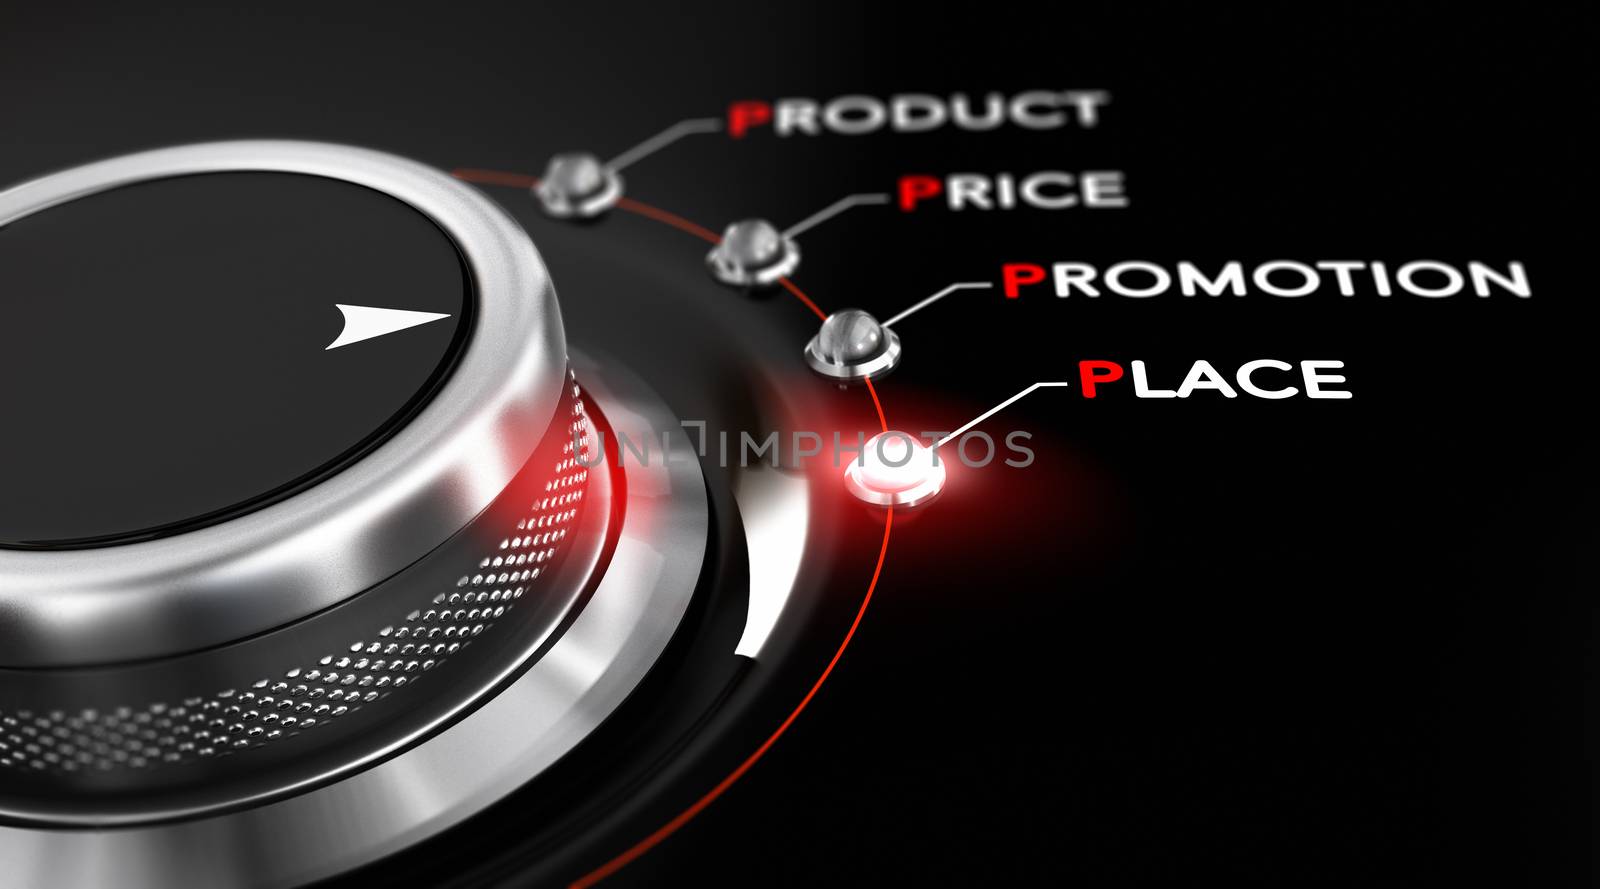 Switch button positioned on the word place, black background and red light. Conceptual image for illustration of Marketing MIX, product, price, promotion and place.